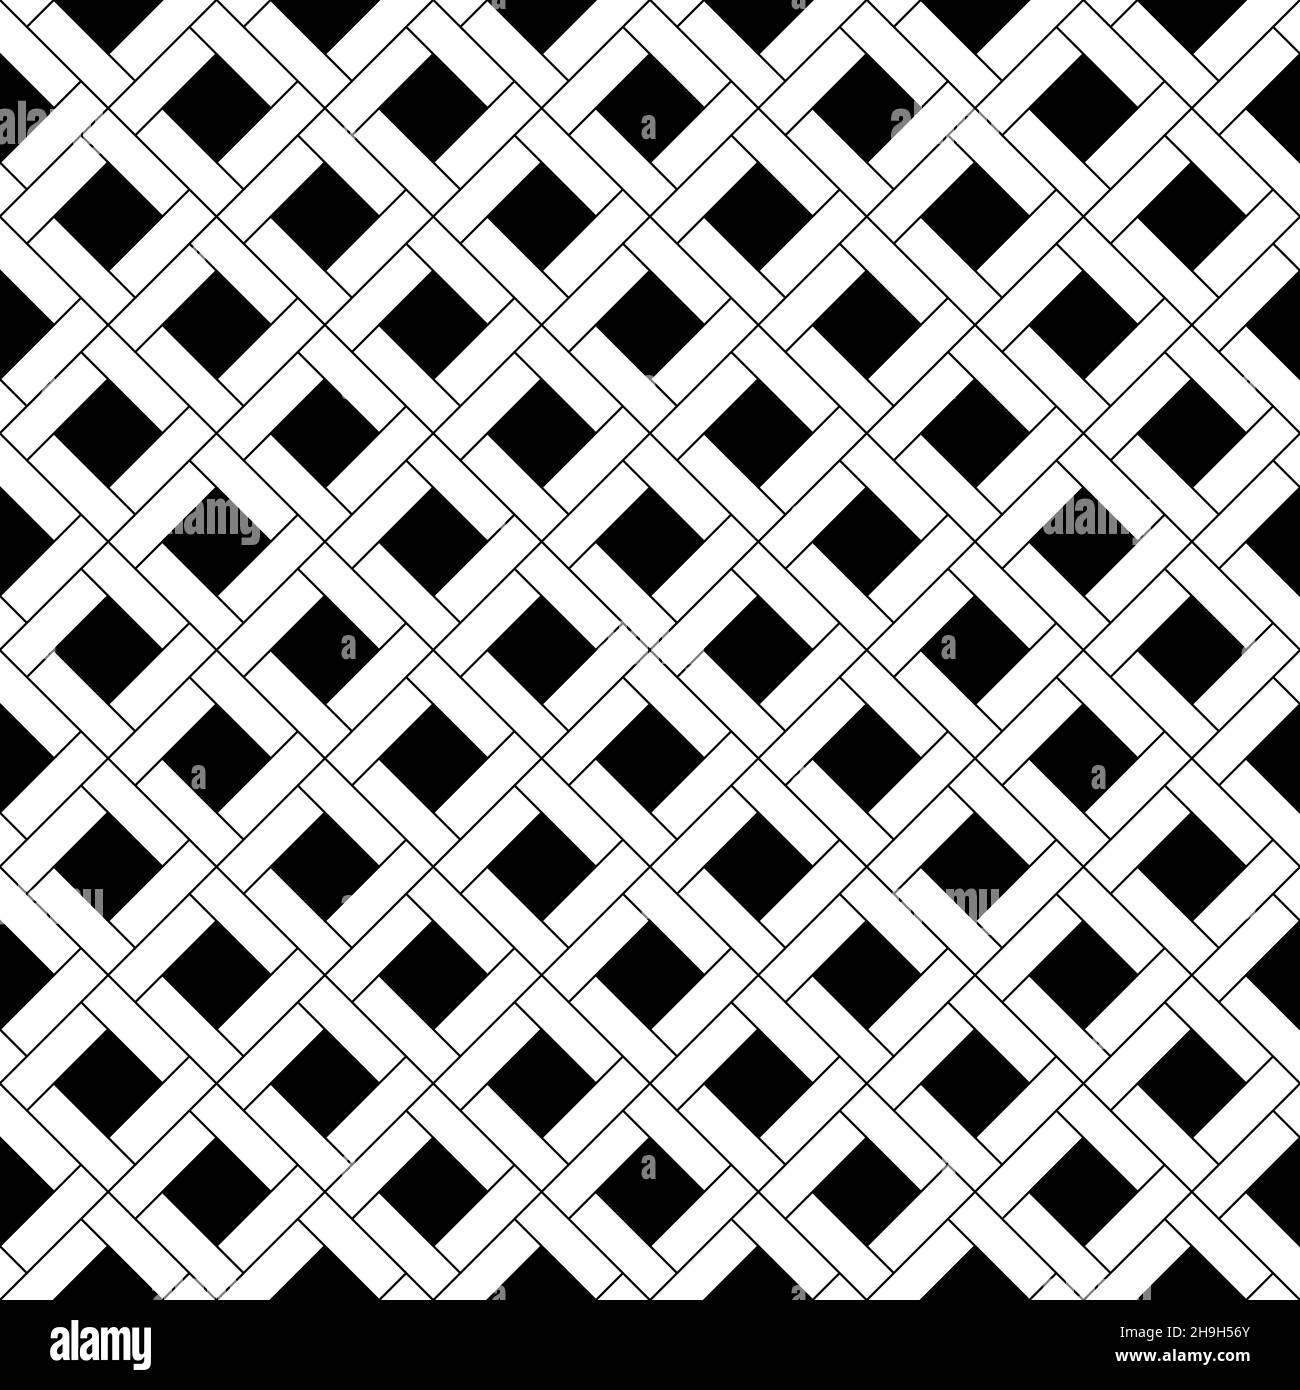 Squares tessellation vector. Pythagorean diagonal tiling. Repeated black checks on white background Stock Vector